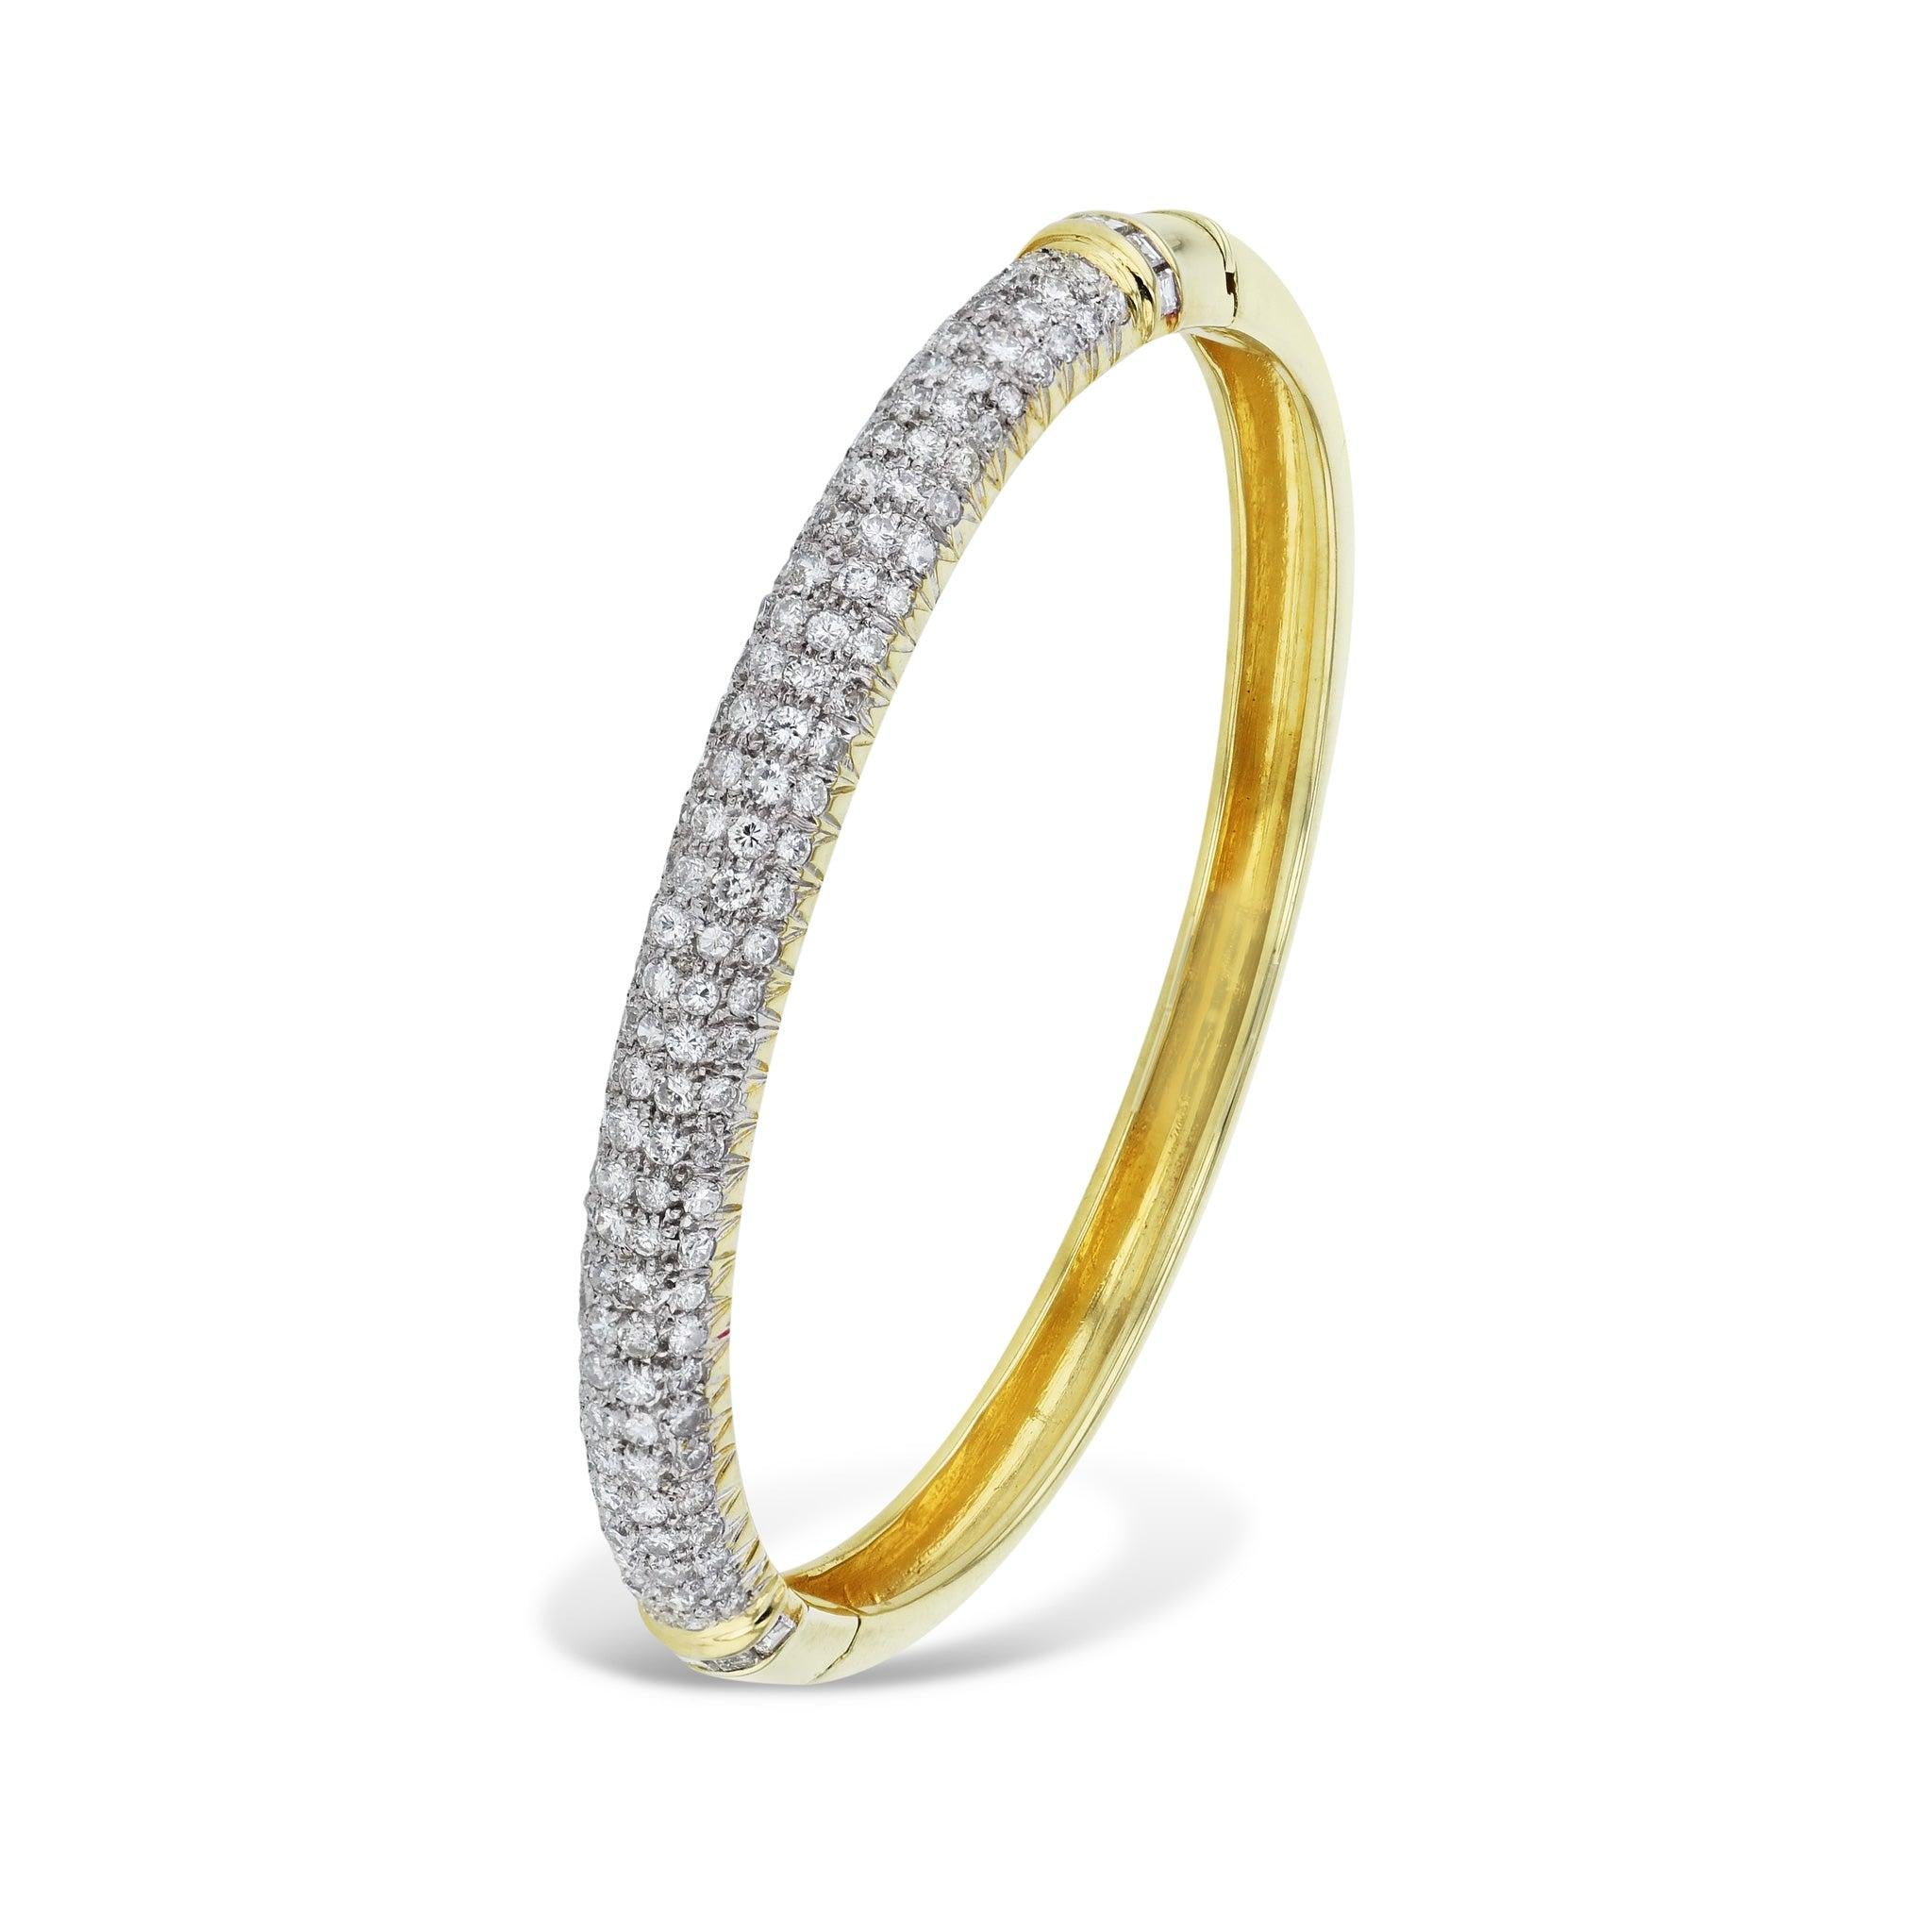 Be dazzled by this 18kt Yellow Gold Diamond Estate Hinge Bracelet! This beautiful piece boasts 132 Round diamonds and 10 Baguette diamonds for a dazzling grand total. A must-have for the Estate Collection!
Yellow Gold Diamond Estate Hinge